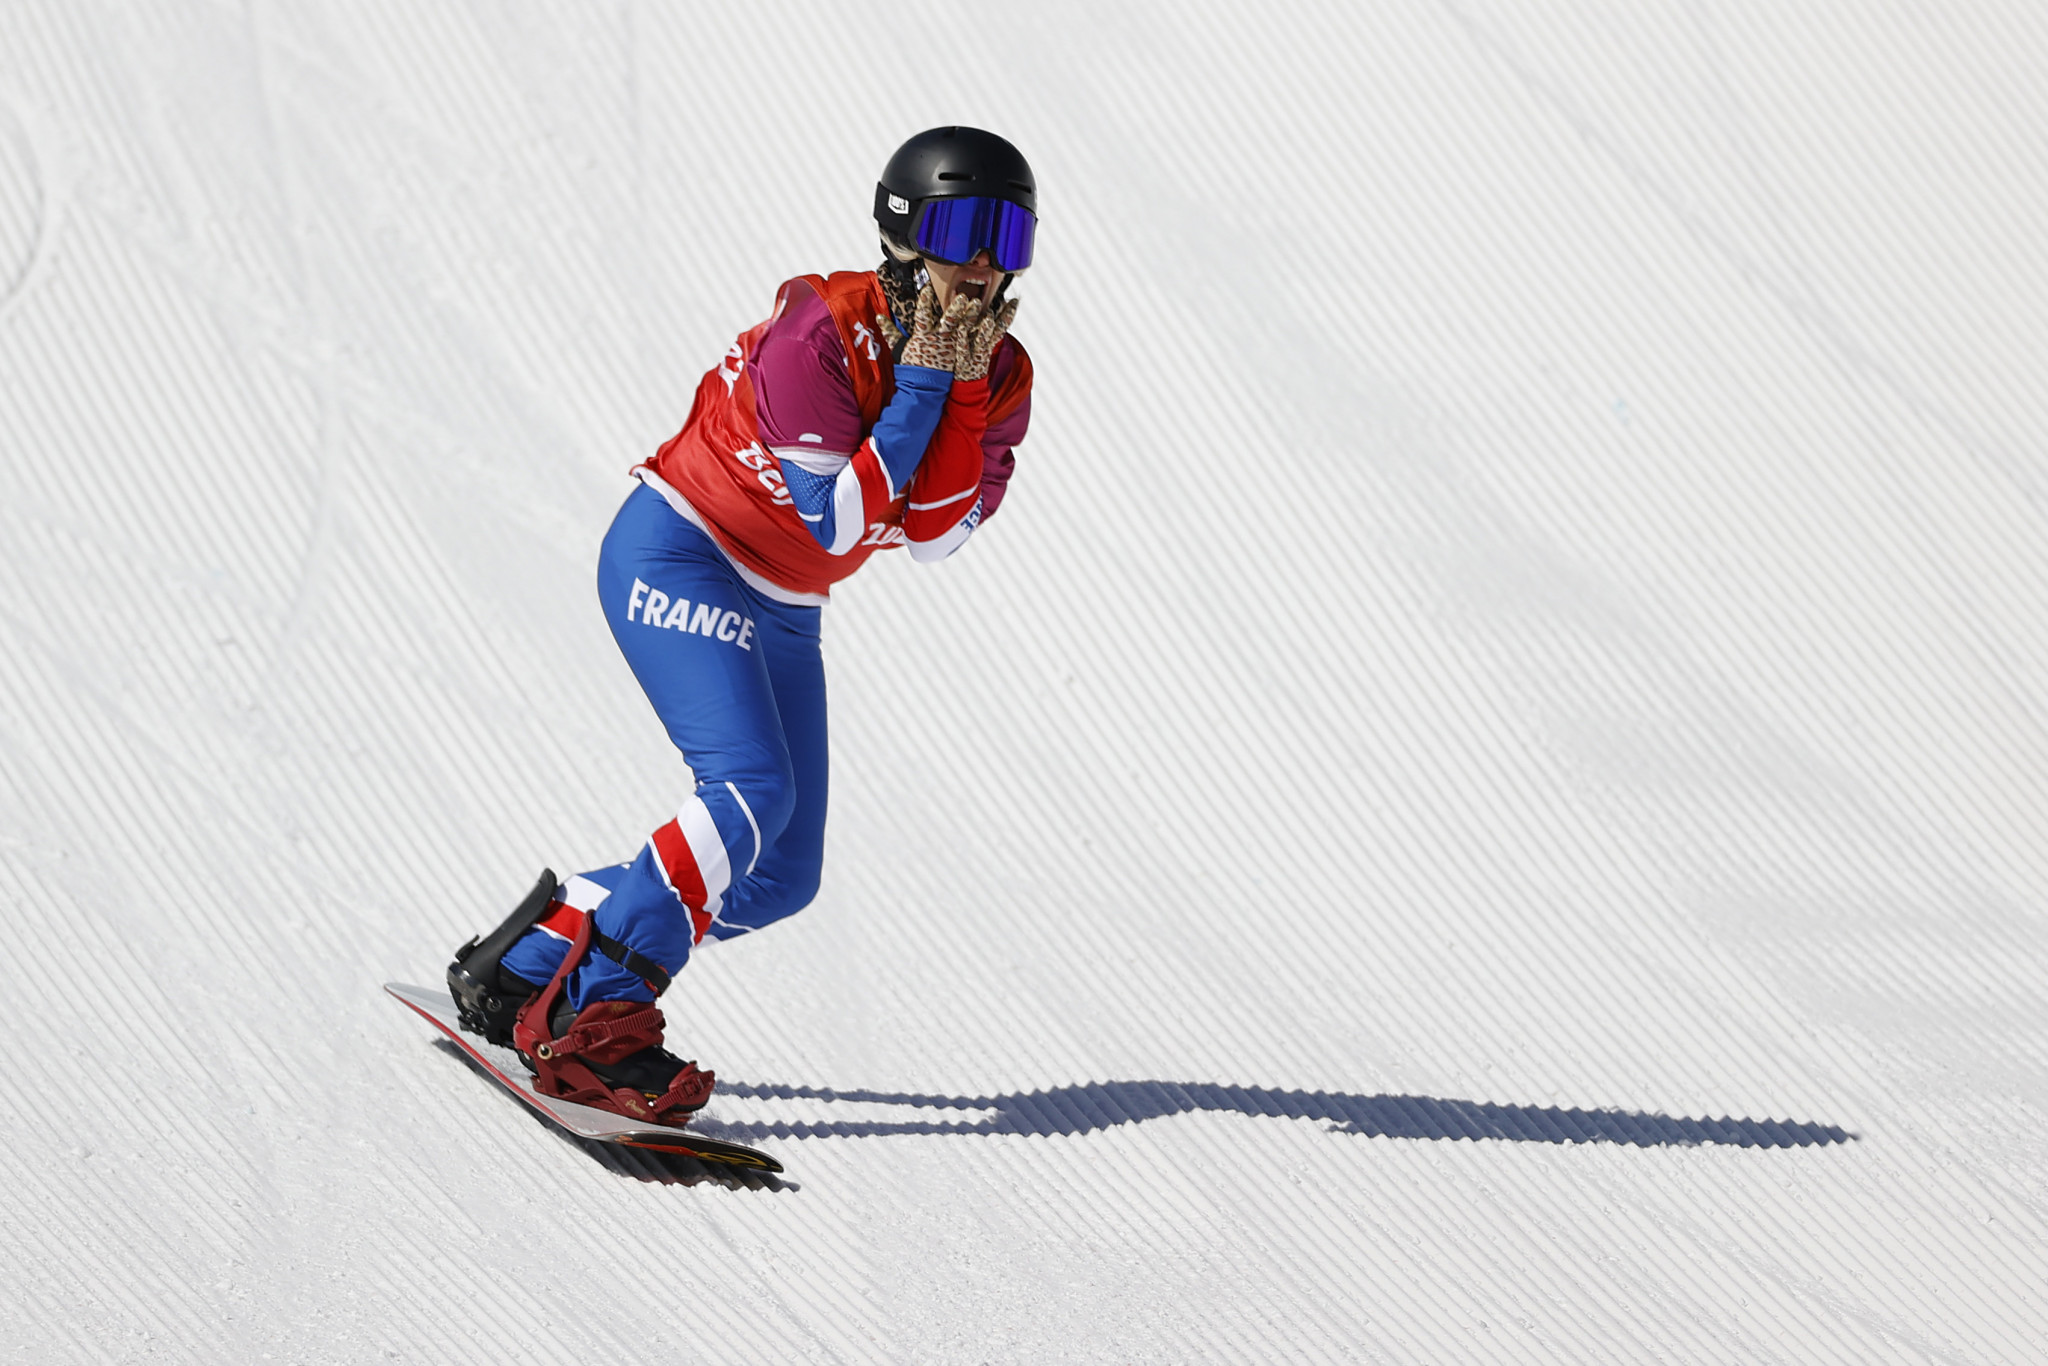 France's Cécile Hernandez came out on top in the women's SB-LL2 snowboard cross event at the Beijing 2022 Winter Paralympics ©Getty Images